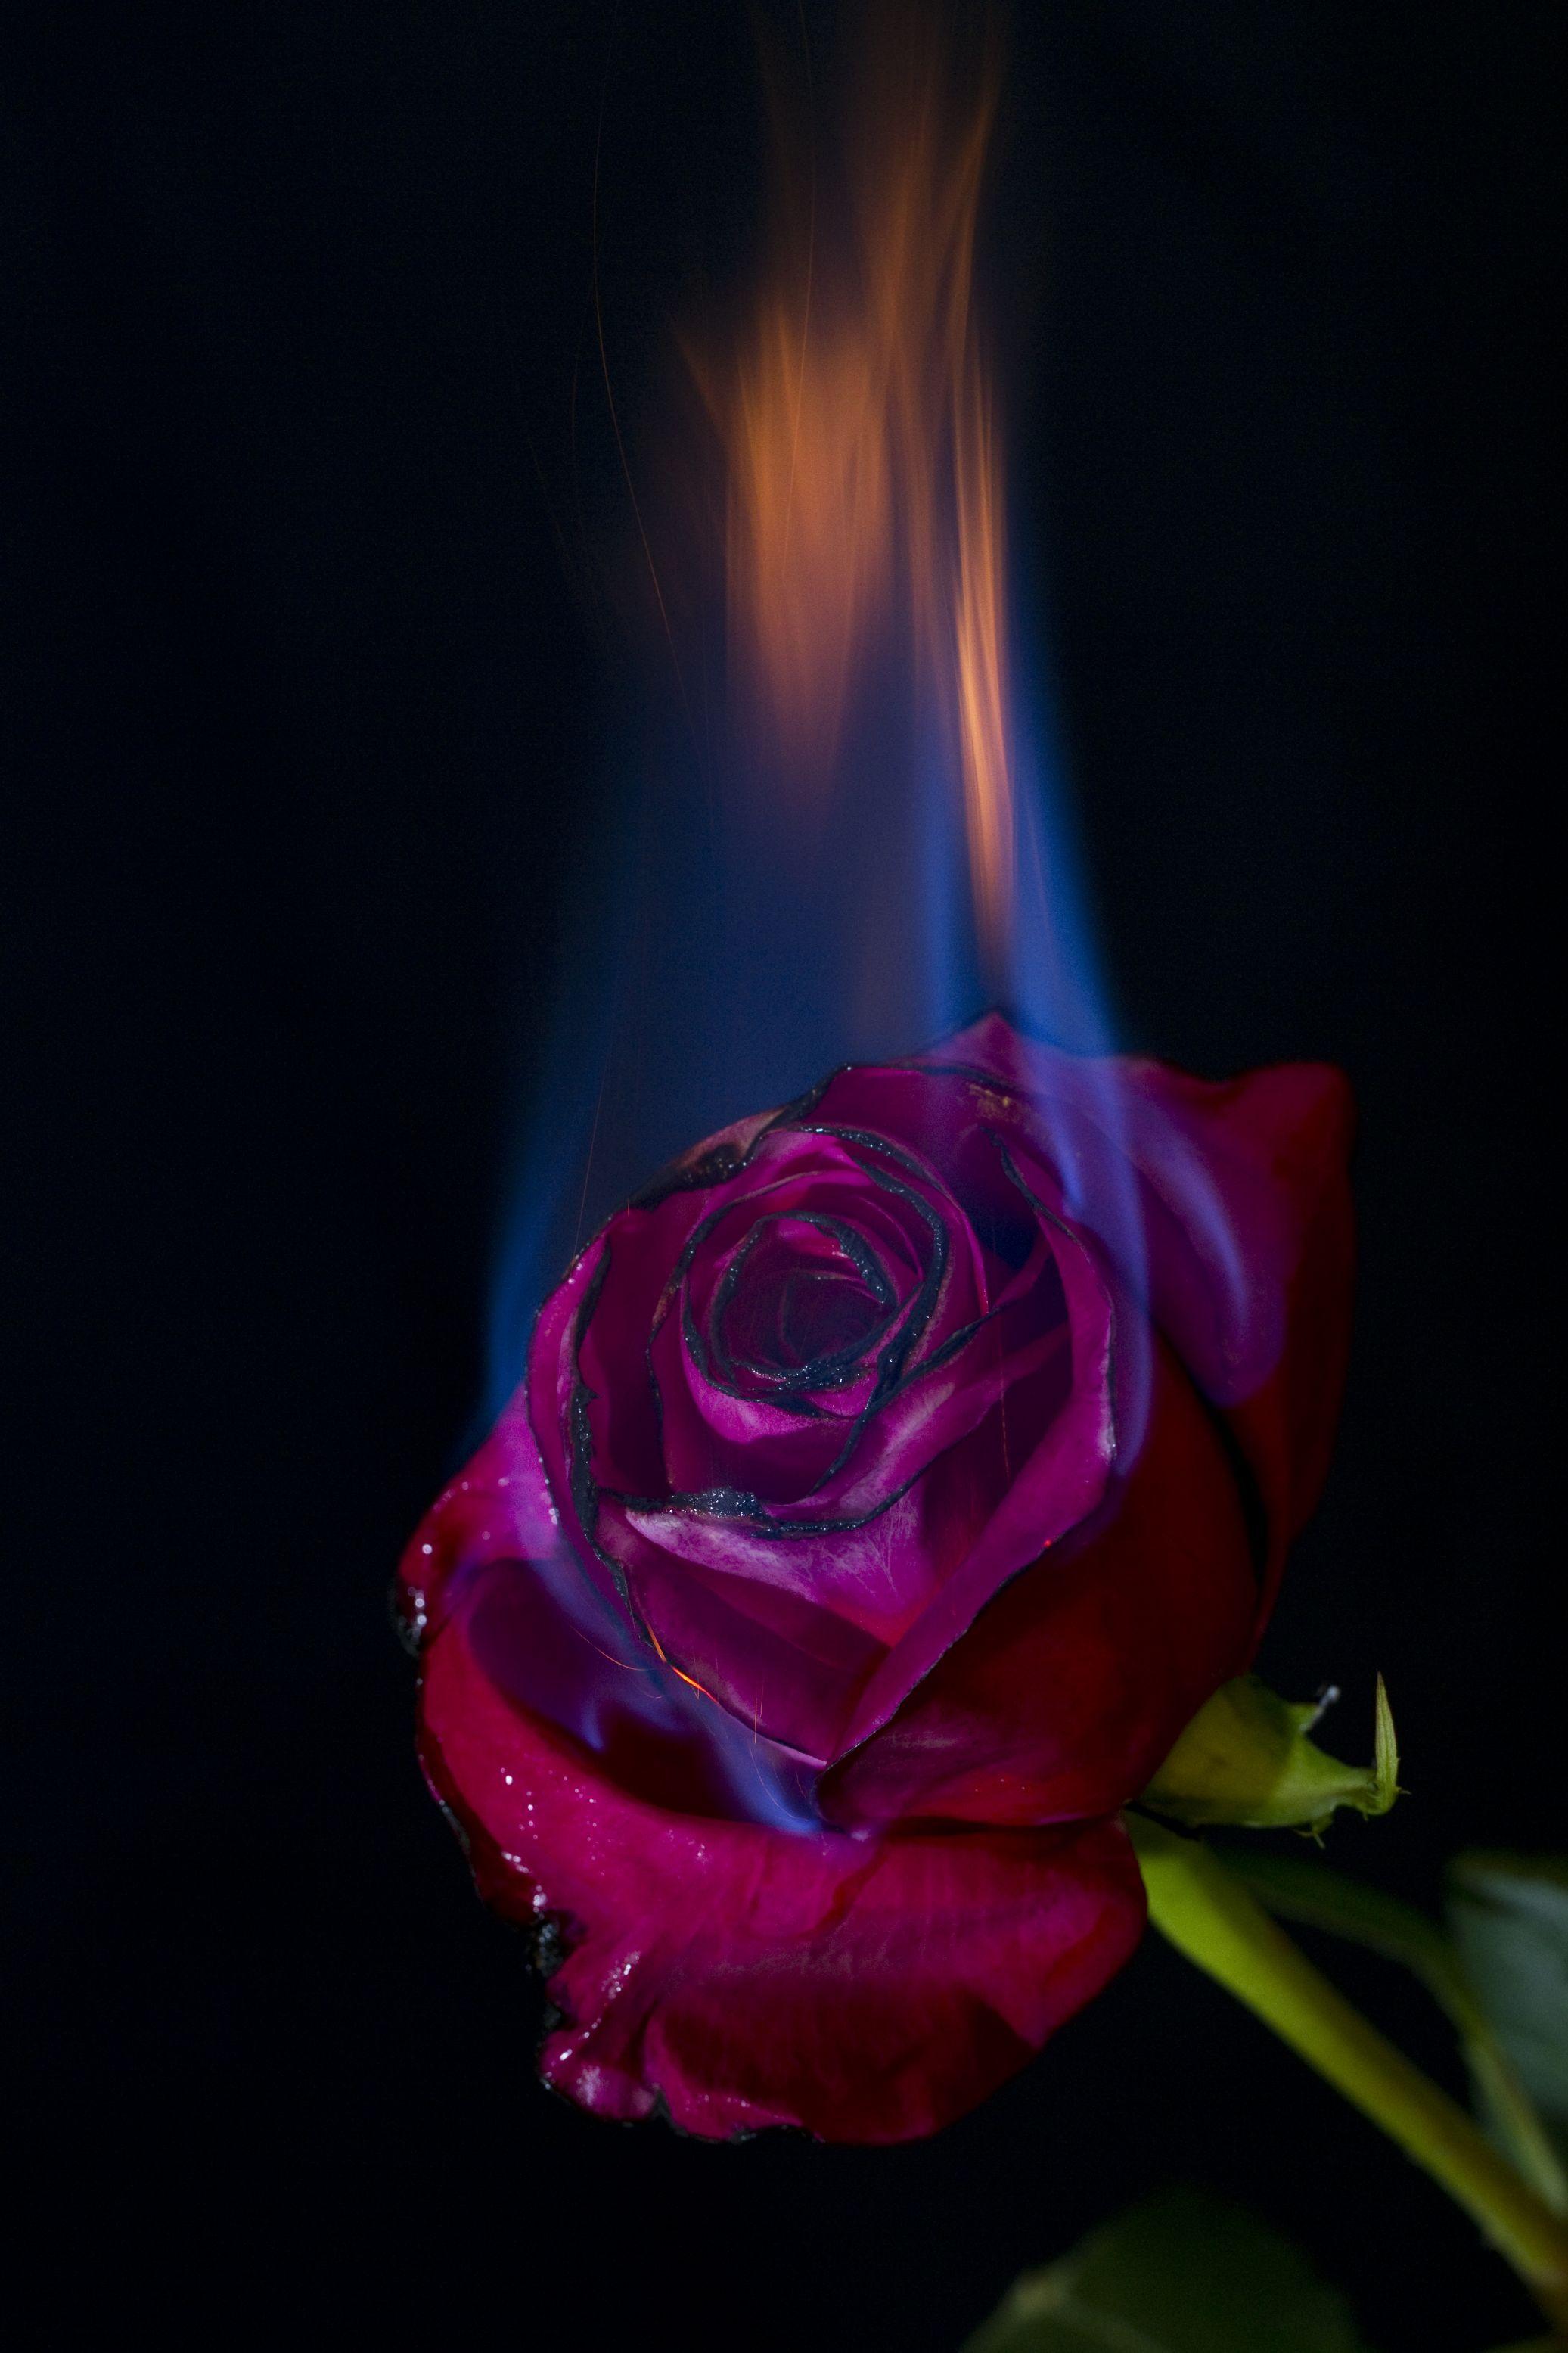 A little project I shot today. Burning rose, Rose on fire, Rose wallpaper